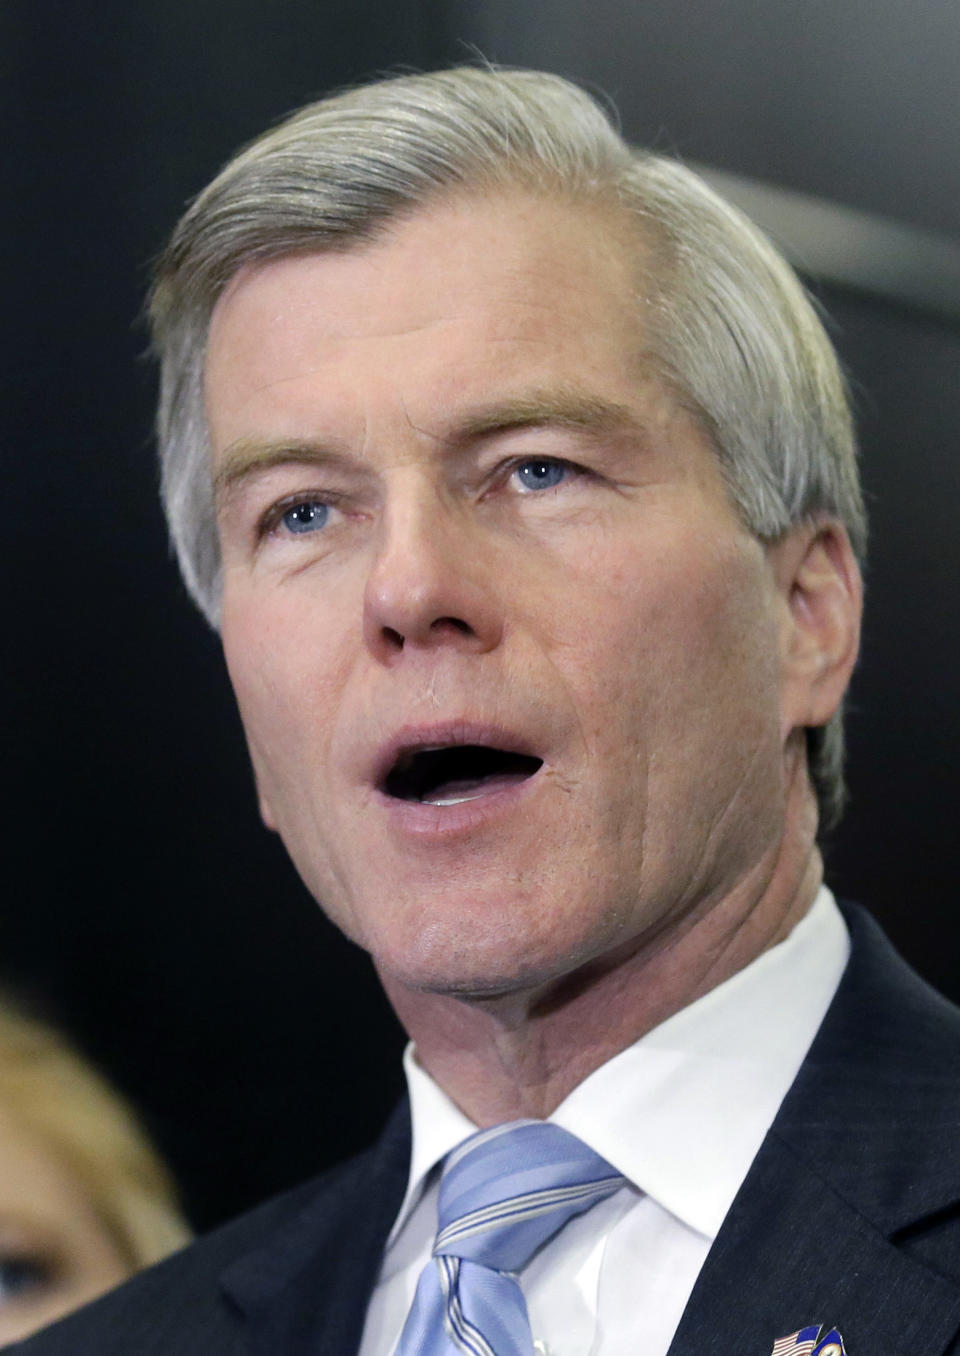 Former Virginia Gov. Bob McDonnell makes a statement during a news conference in Richmond, Va., Tuesday, Jan. 21, 2014. McDonnell and his wife were indicted Tuesday on corruption charges after a monthslong federal investigation into gifts the Republican received from a political donor. (AP Photo/Steve Helber)